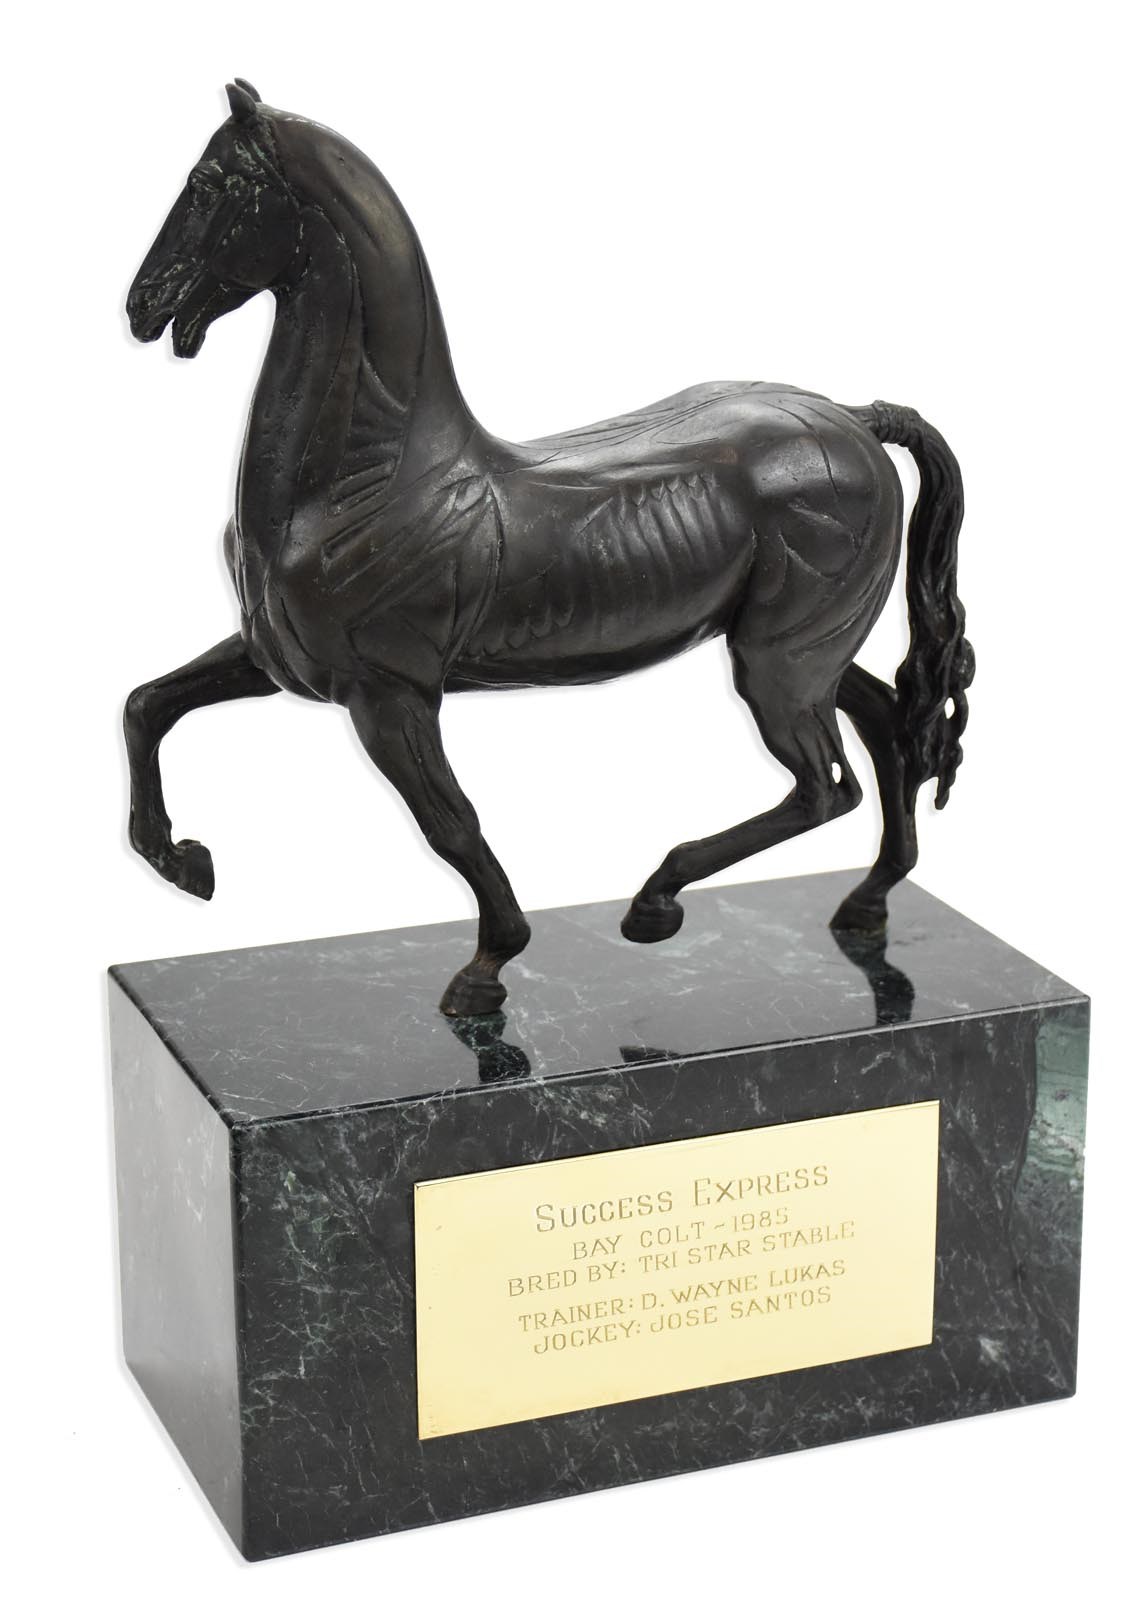 Horse Racing - 1987 Breeders' Cup Juvenile Owner's Trophy - Won by Success Express